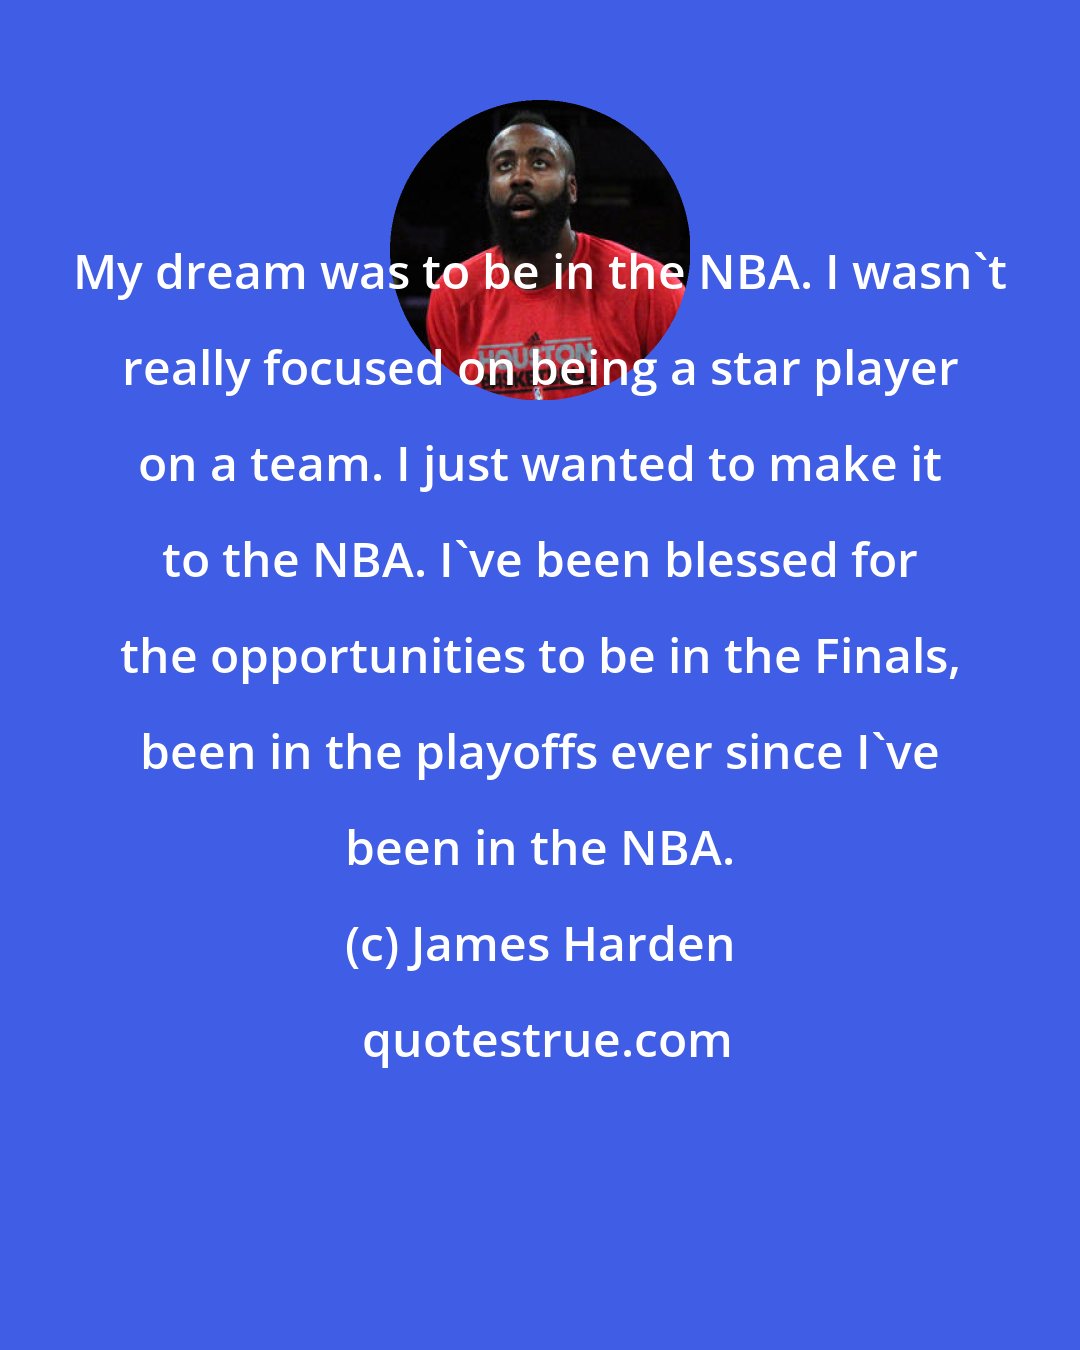 James Harden: My dream was to be in the NBA. I wasn't really focused on being a star player on a team. I just wanted to make it to the NBA. I've been blessed for the opportunities to be in the Finals, been in the playoffs ever since I've been in the NBA.